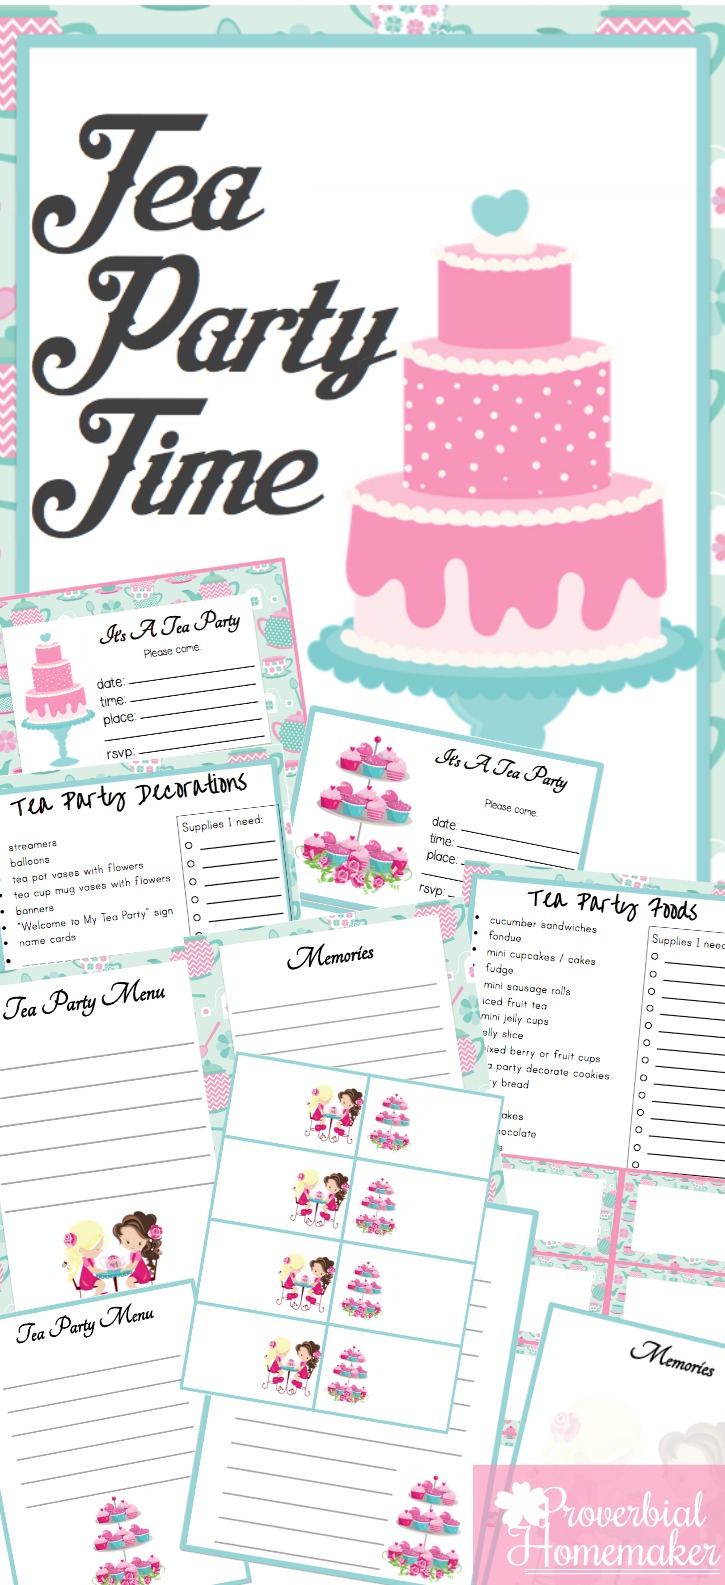 Adorable tea party printable pack! Have a fun tea party or let the kids host one with invitations, food labels, planner pages, and more!